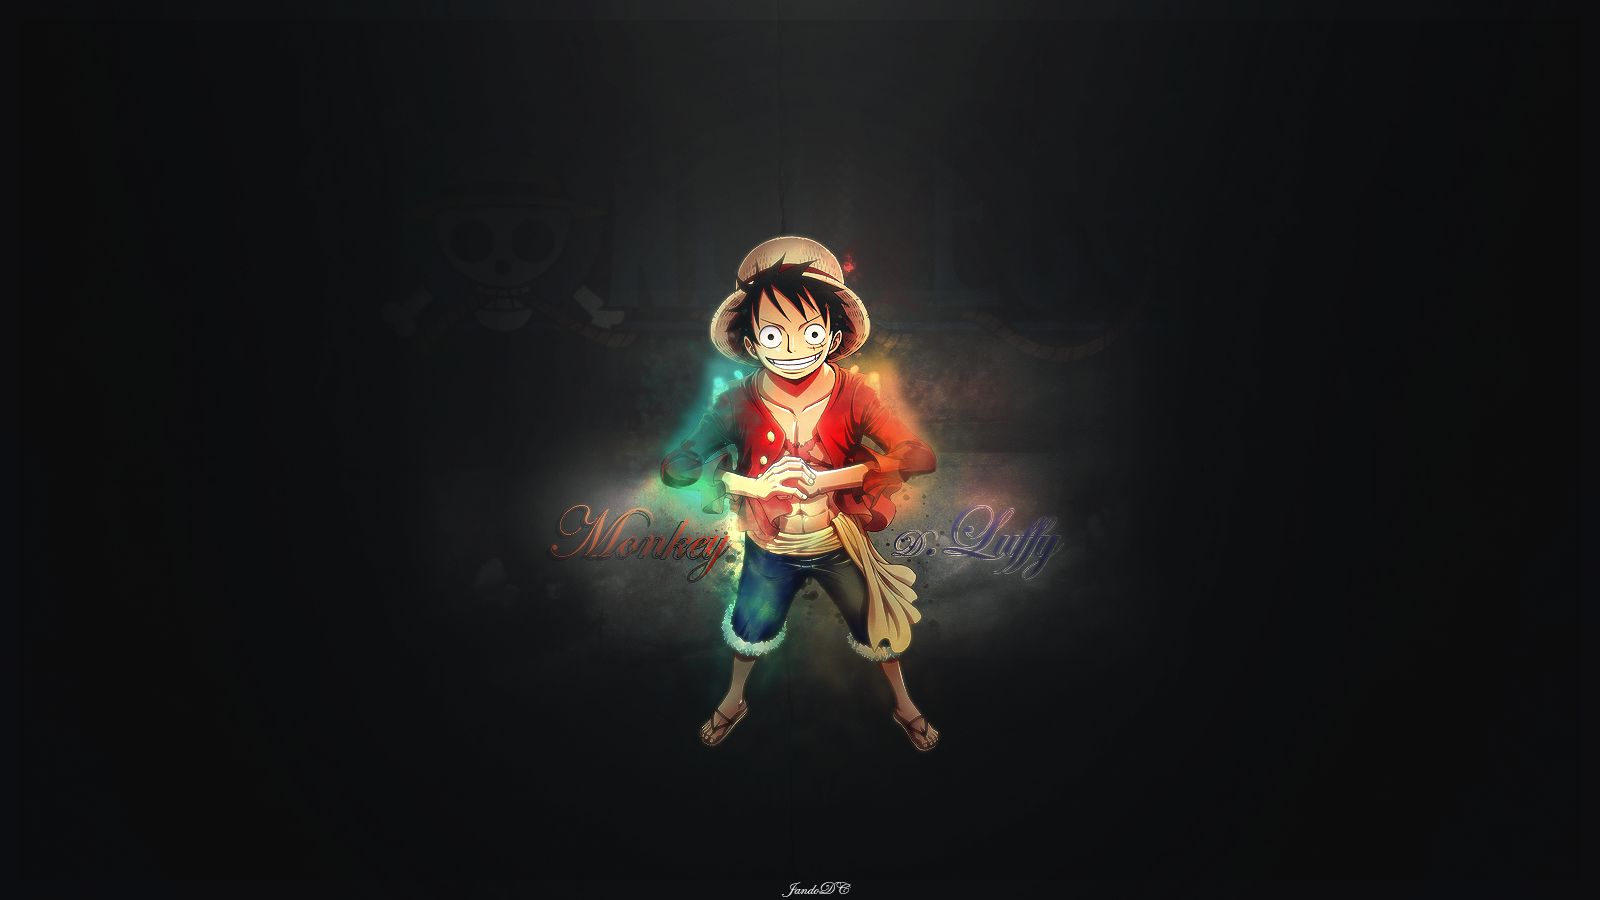 300+] Monkey D Luffy Wallpapers | Wallpapers.com